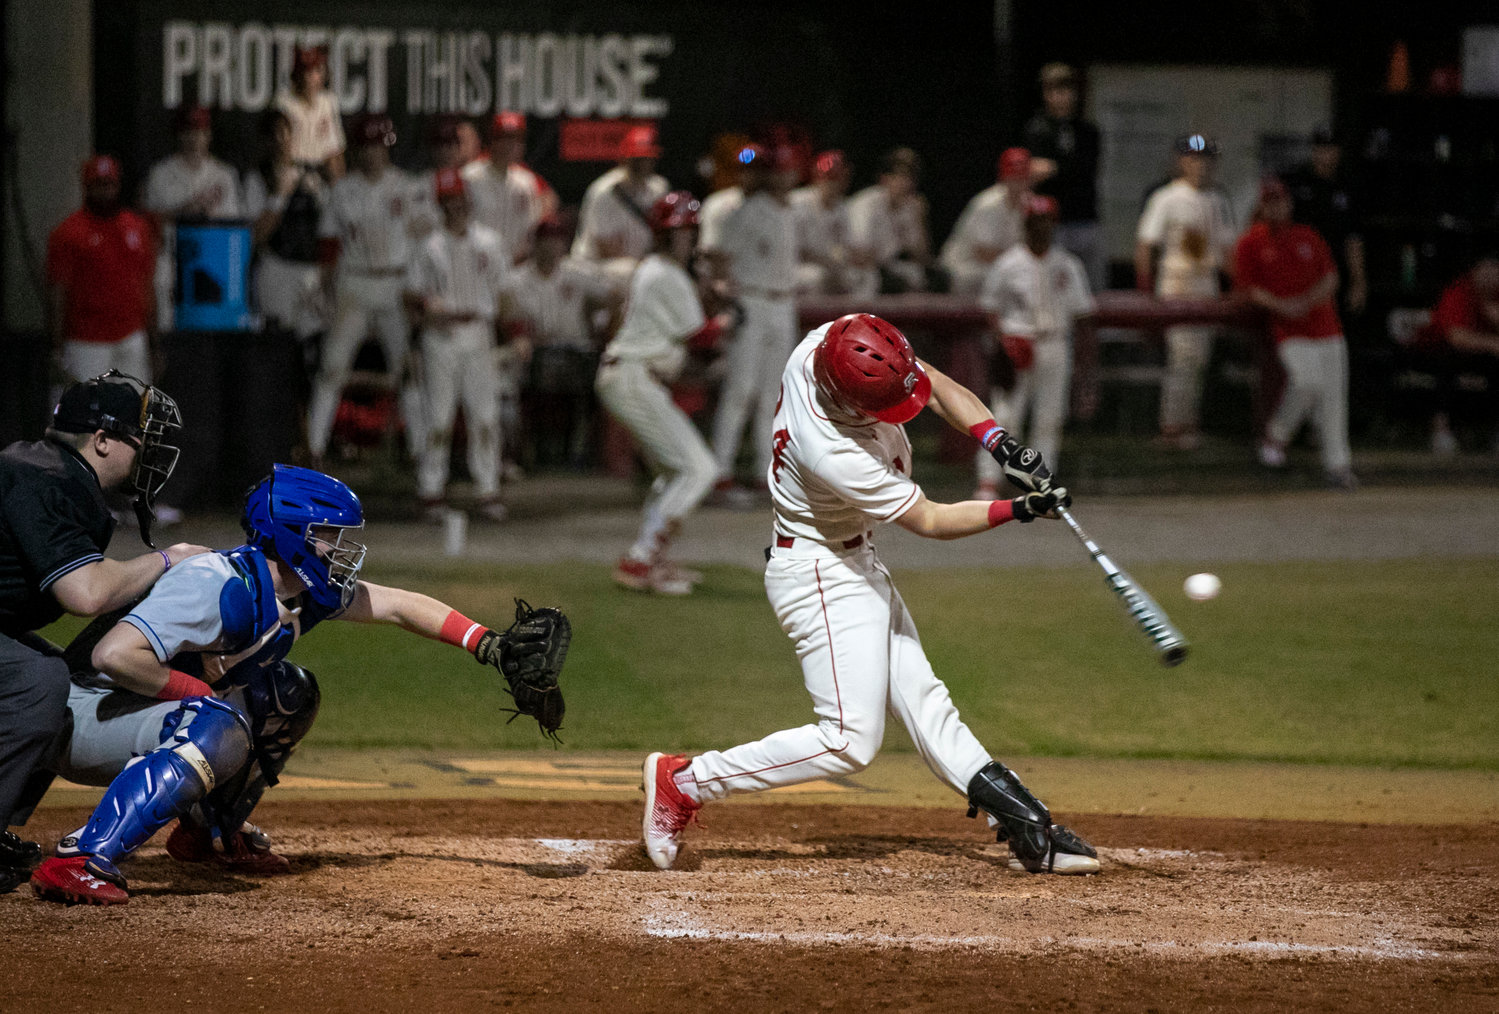 Spanish Fort’s Hayes Miller connects on a pitch during Opening Day festivities Thursday night at home. The Toros rallied for a 7-4 win to grab their first win in their first try.